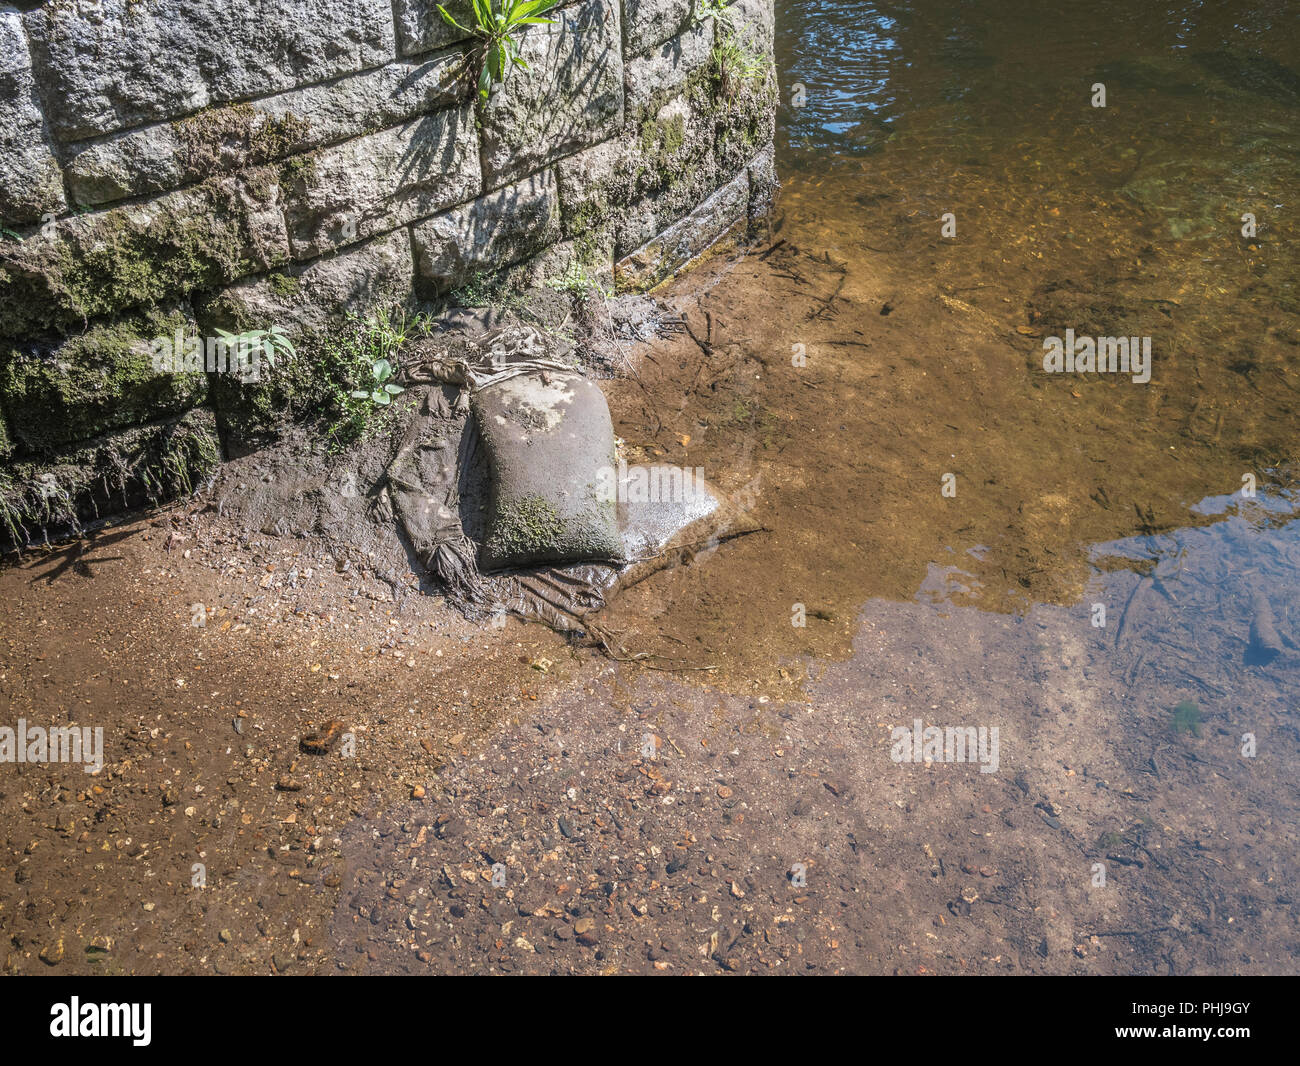 Remnants of sandbags used in flood defence. Stock Photo